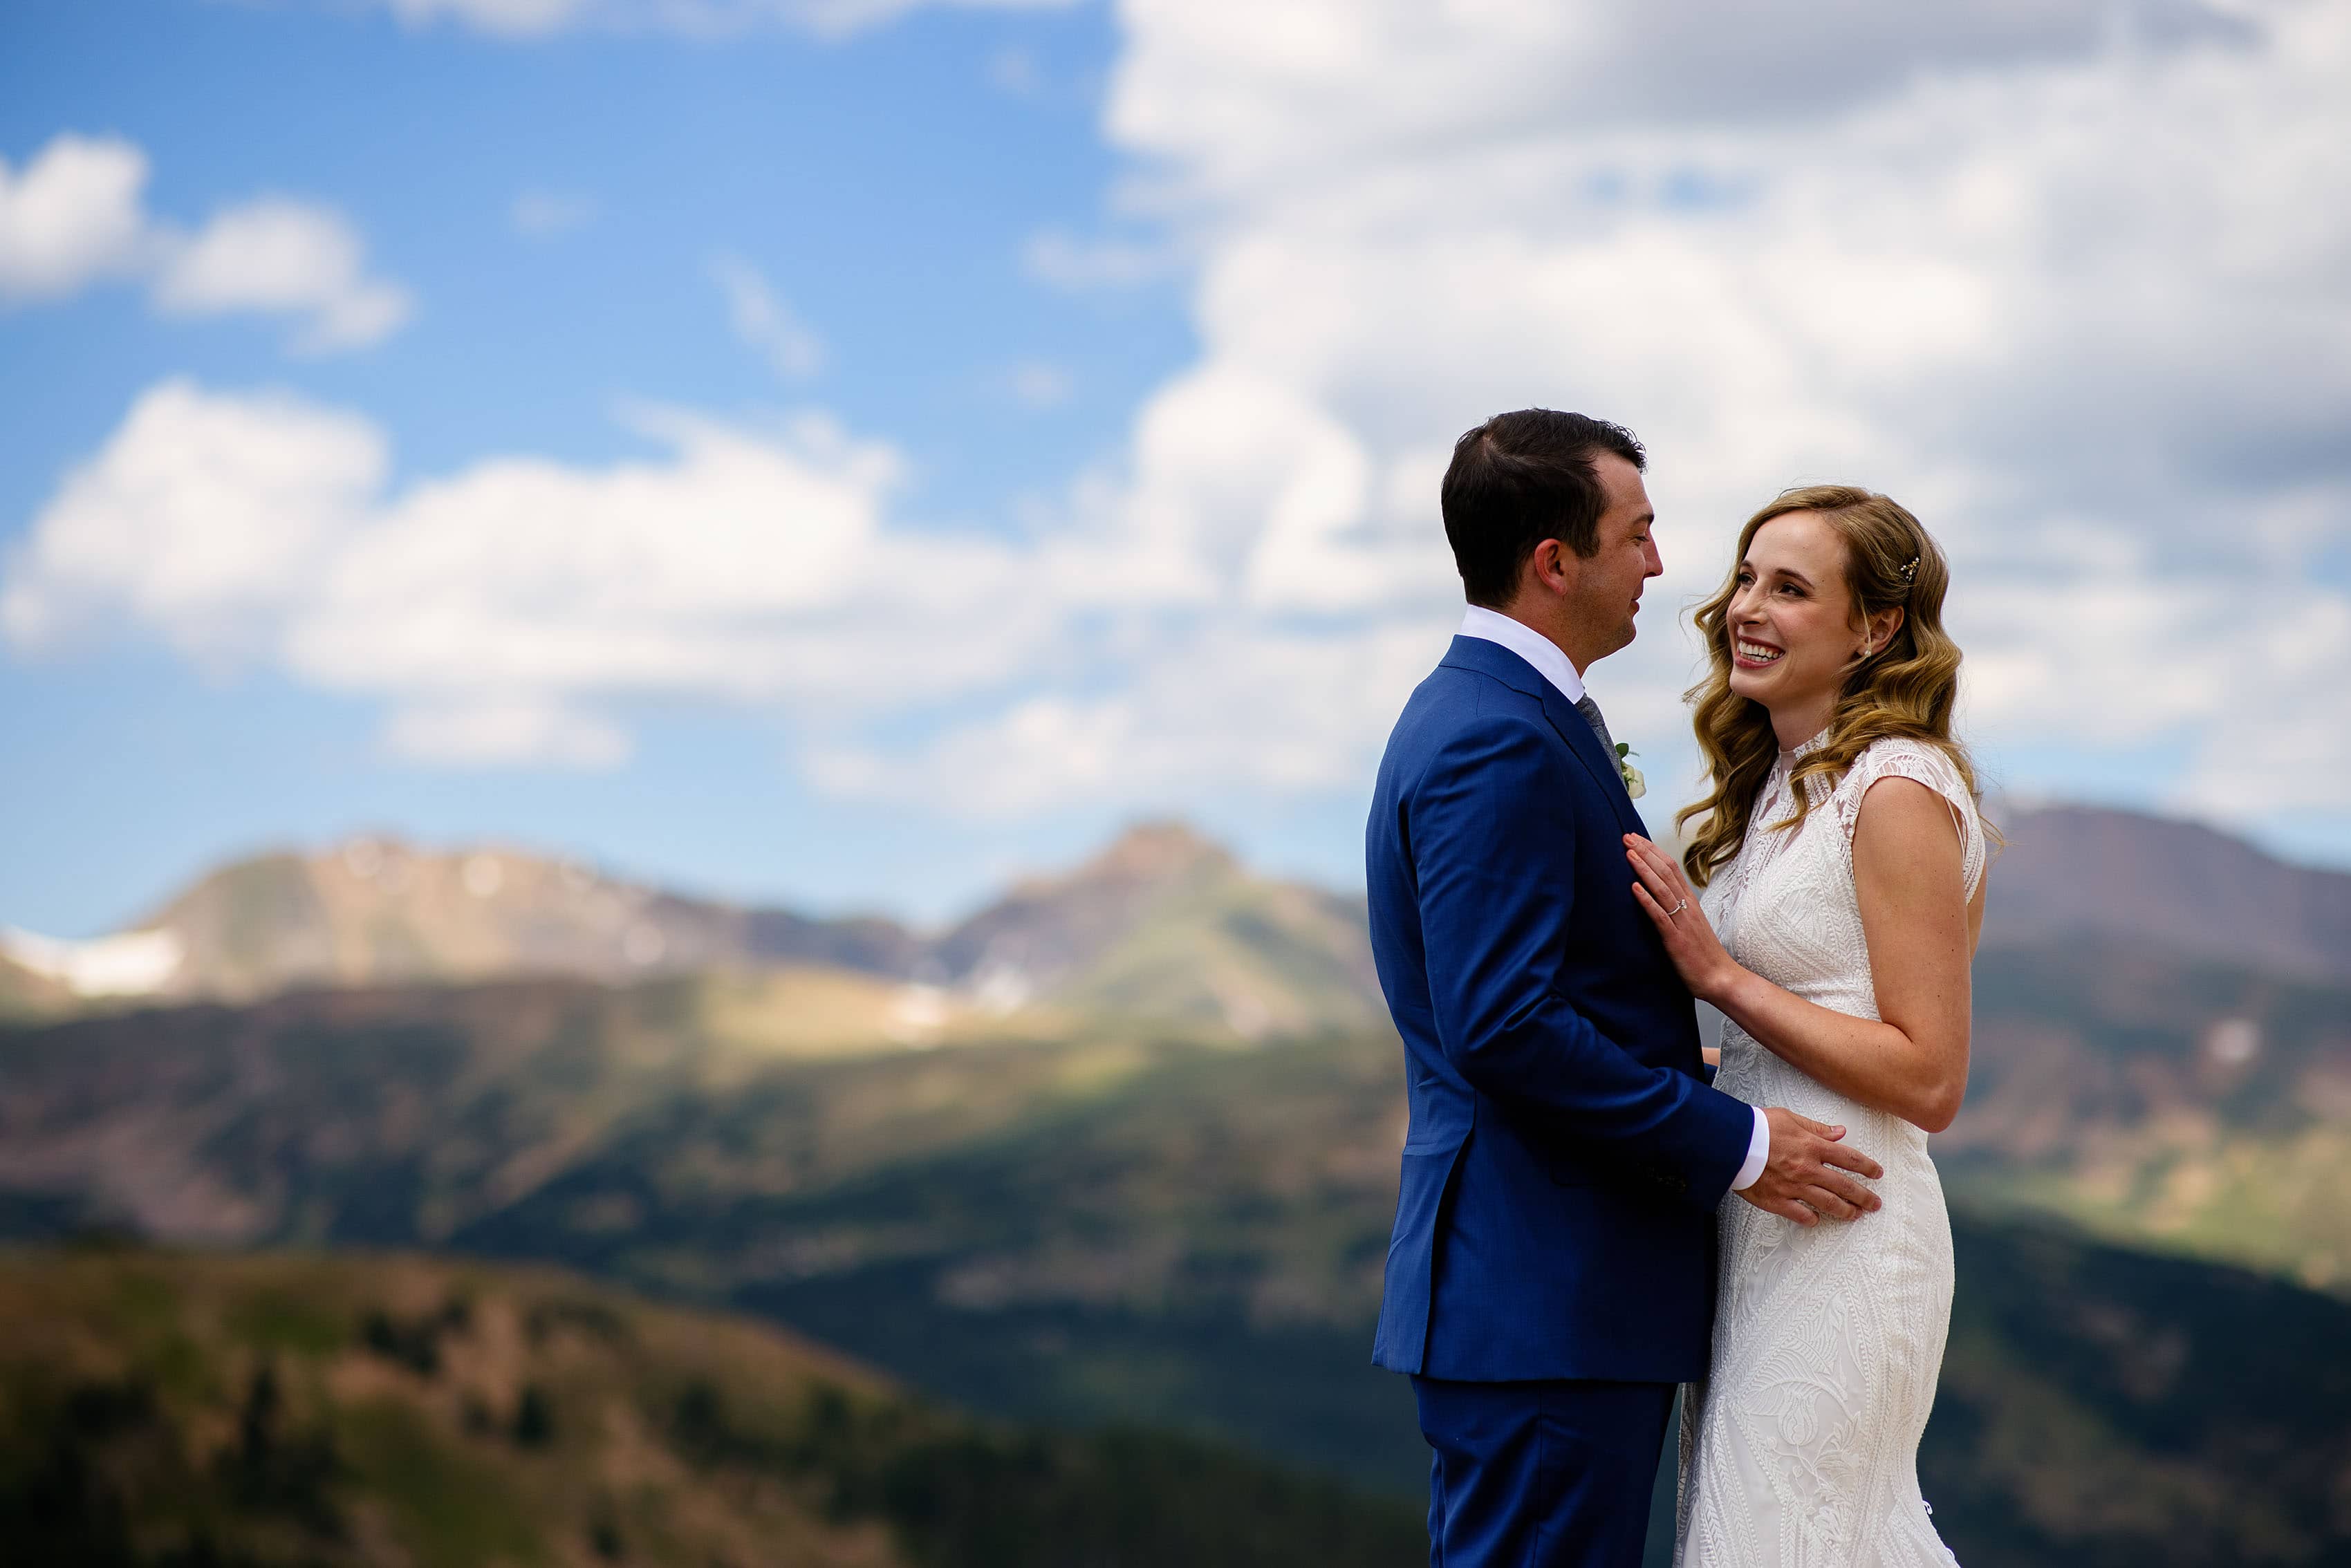 The couple poses together on Loveland Pass